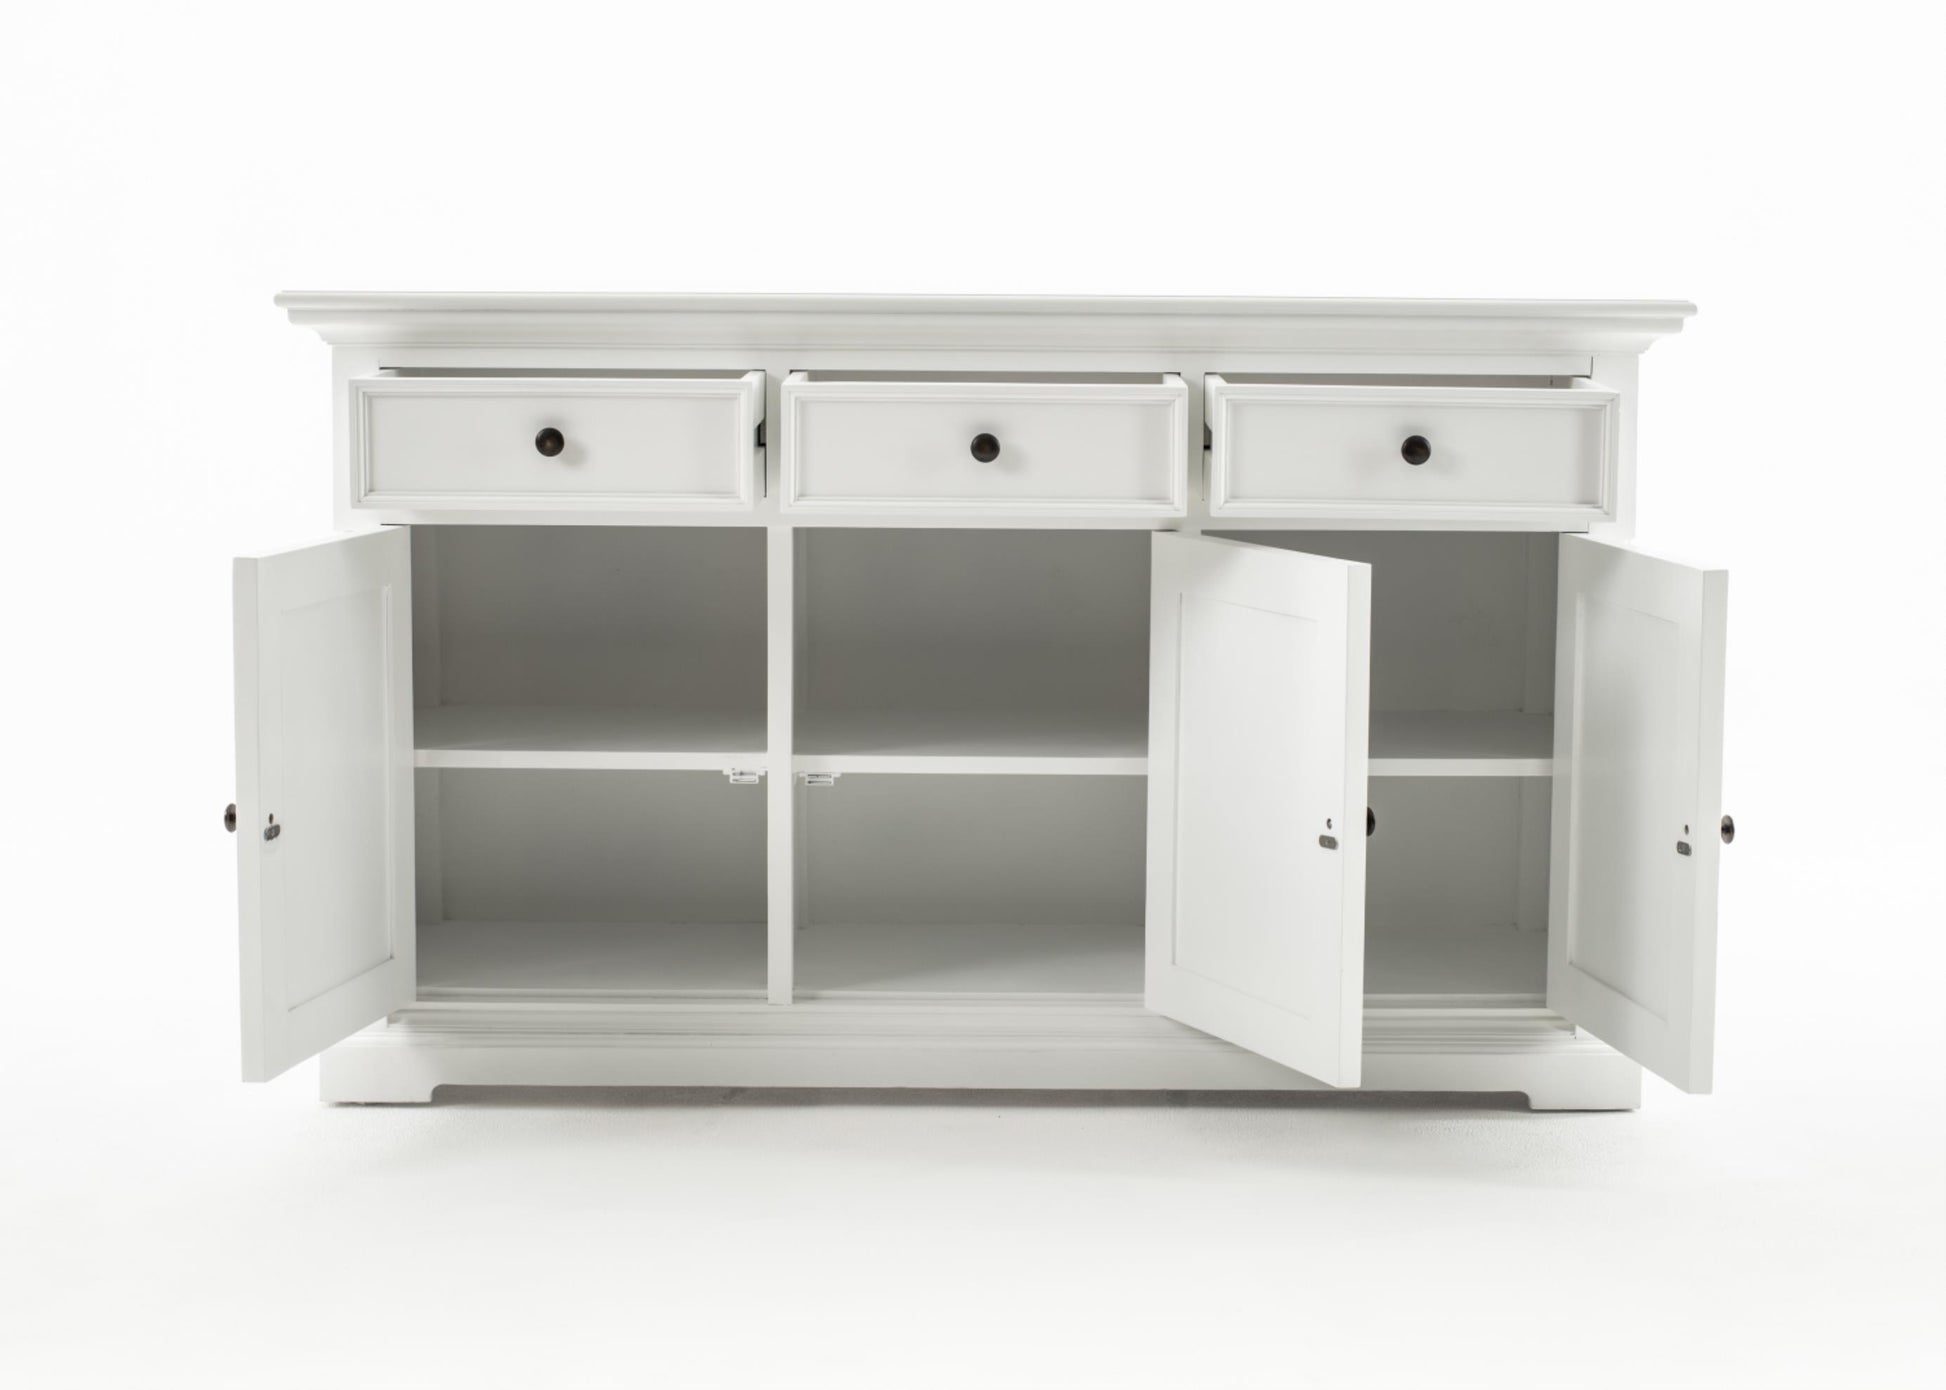 Provence collection by Nova Solo.  Classic Sideboard with 3 doors CasaFenix